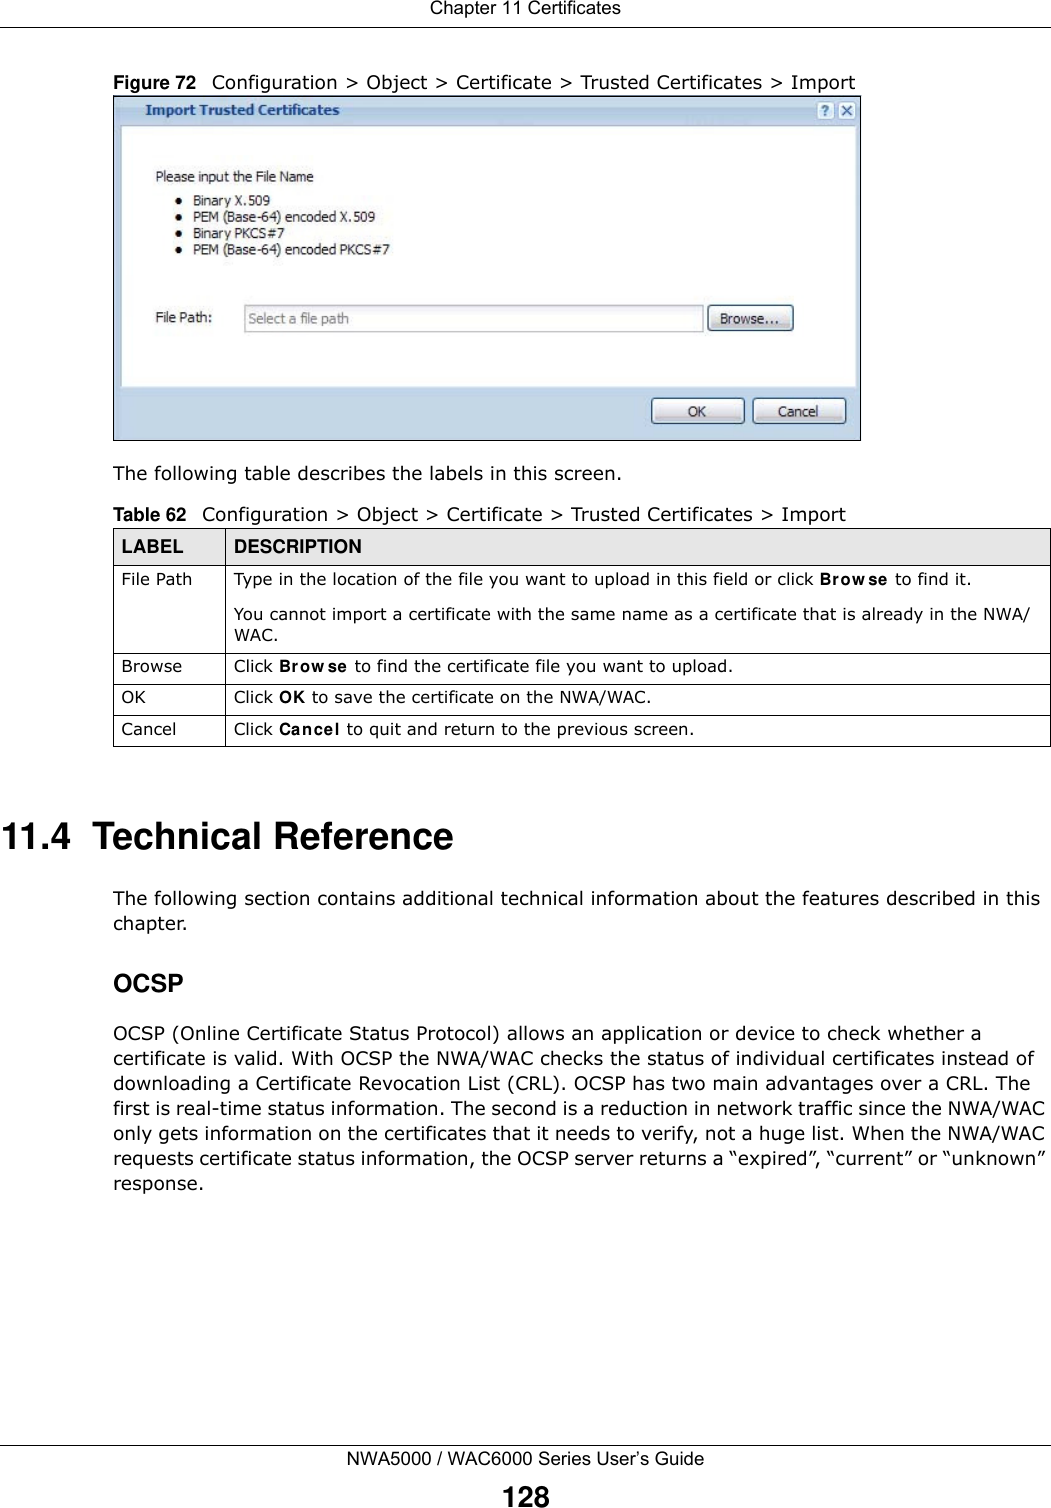 Chapter 11 CertificatesNWA5000 / WAC6000 Series User’s Guide128Figure 72   Configuration &gt; Object &gt; Certificate &gt; Trusted Certificates &gt; ImportThe following table describes the labels in this screen. 11.4  Technical ReferenceThe following section contains additional technical information about the features described in this chapter.OCSPOCSP (Online Certificate Status Protocol) allows an application or device to check whether a certificate is valid. With OCSP the NWA/WAC checks the status of individual certificates instead of downloading a Certificate Revocation List (CRL). OCSP has two main advantages over a CRL. The first is real-time status information. The second is a reduction in network traffic since the NWA/WAC only gets information on the certificates that it needs to verify, not a huge list. When the NWA/WAC requests certificate status information, the OCSP server returns a “expired”, “current” or “unknown” response.Table 62   Configuration &gt; Object &gt; Certificate &gt; Trusted Certificates &gt; ImportLABEL DESCRIPTIONFile Path  Type in the location of the file you want to upload in this field or click Br ow se to find it.You cannot import a certificate with the same name as a certificate that is already in the NWA/WAC.Browse Click Brow se  to find the certificate file you want to upload. OK Click OK to save the certificate on the NWA/WAC.Cancel Click Cance l to quit and return to the previous screen.